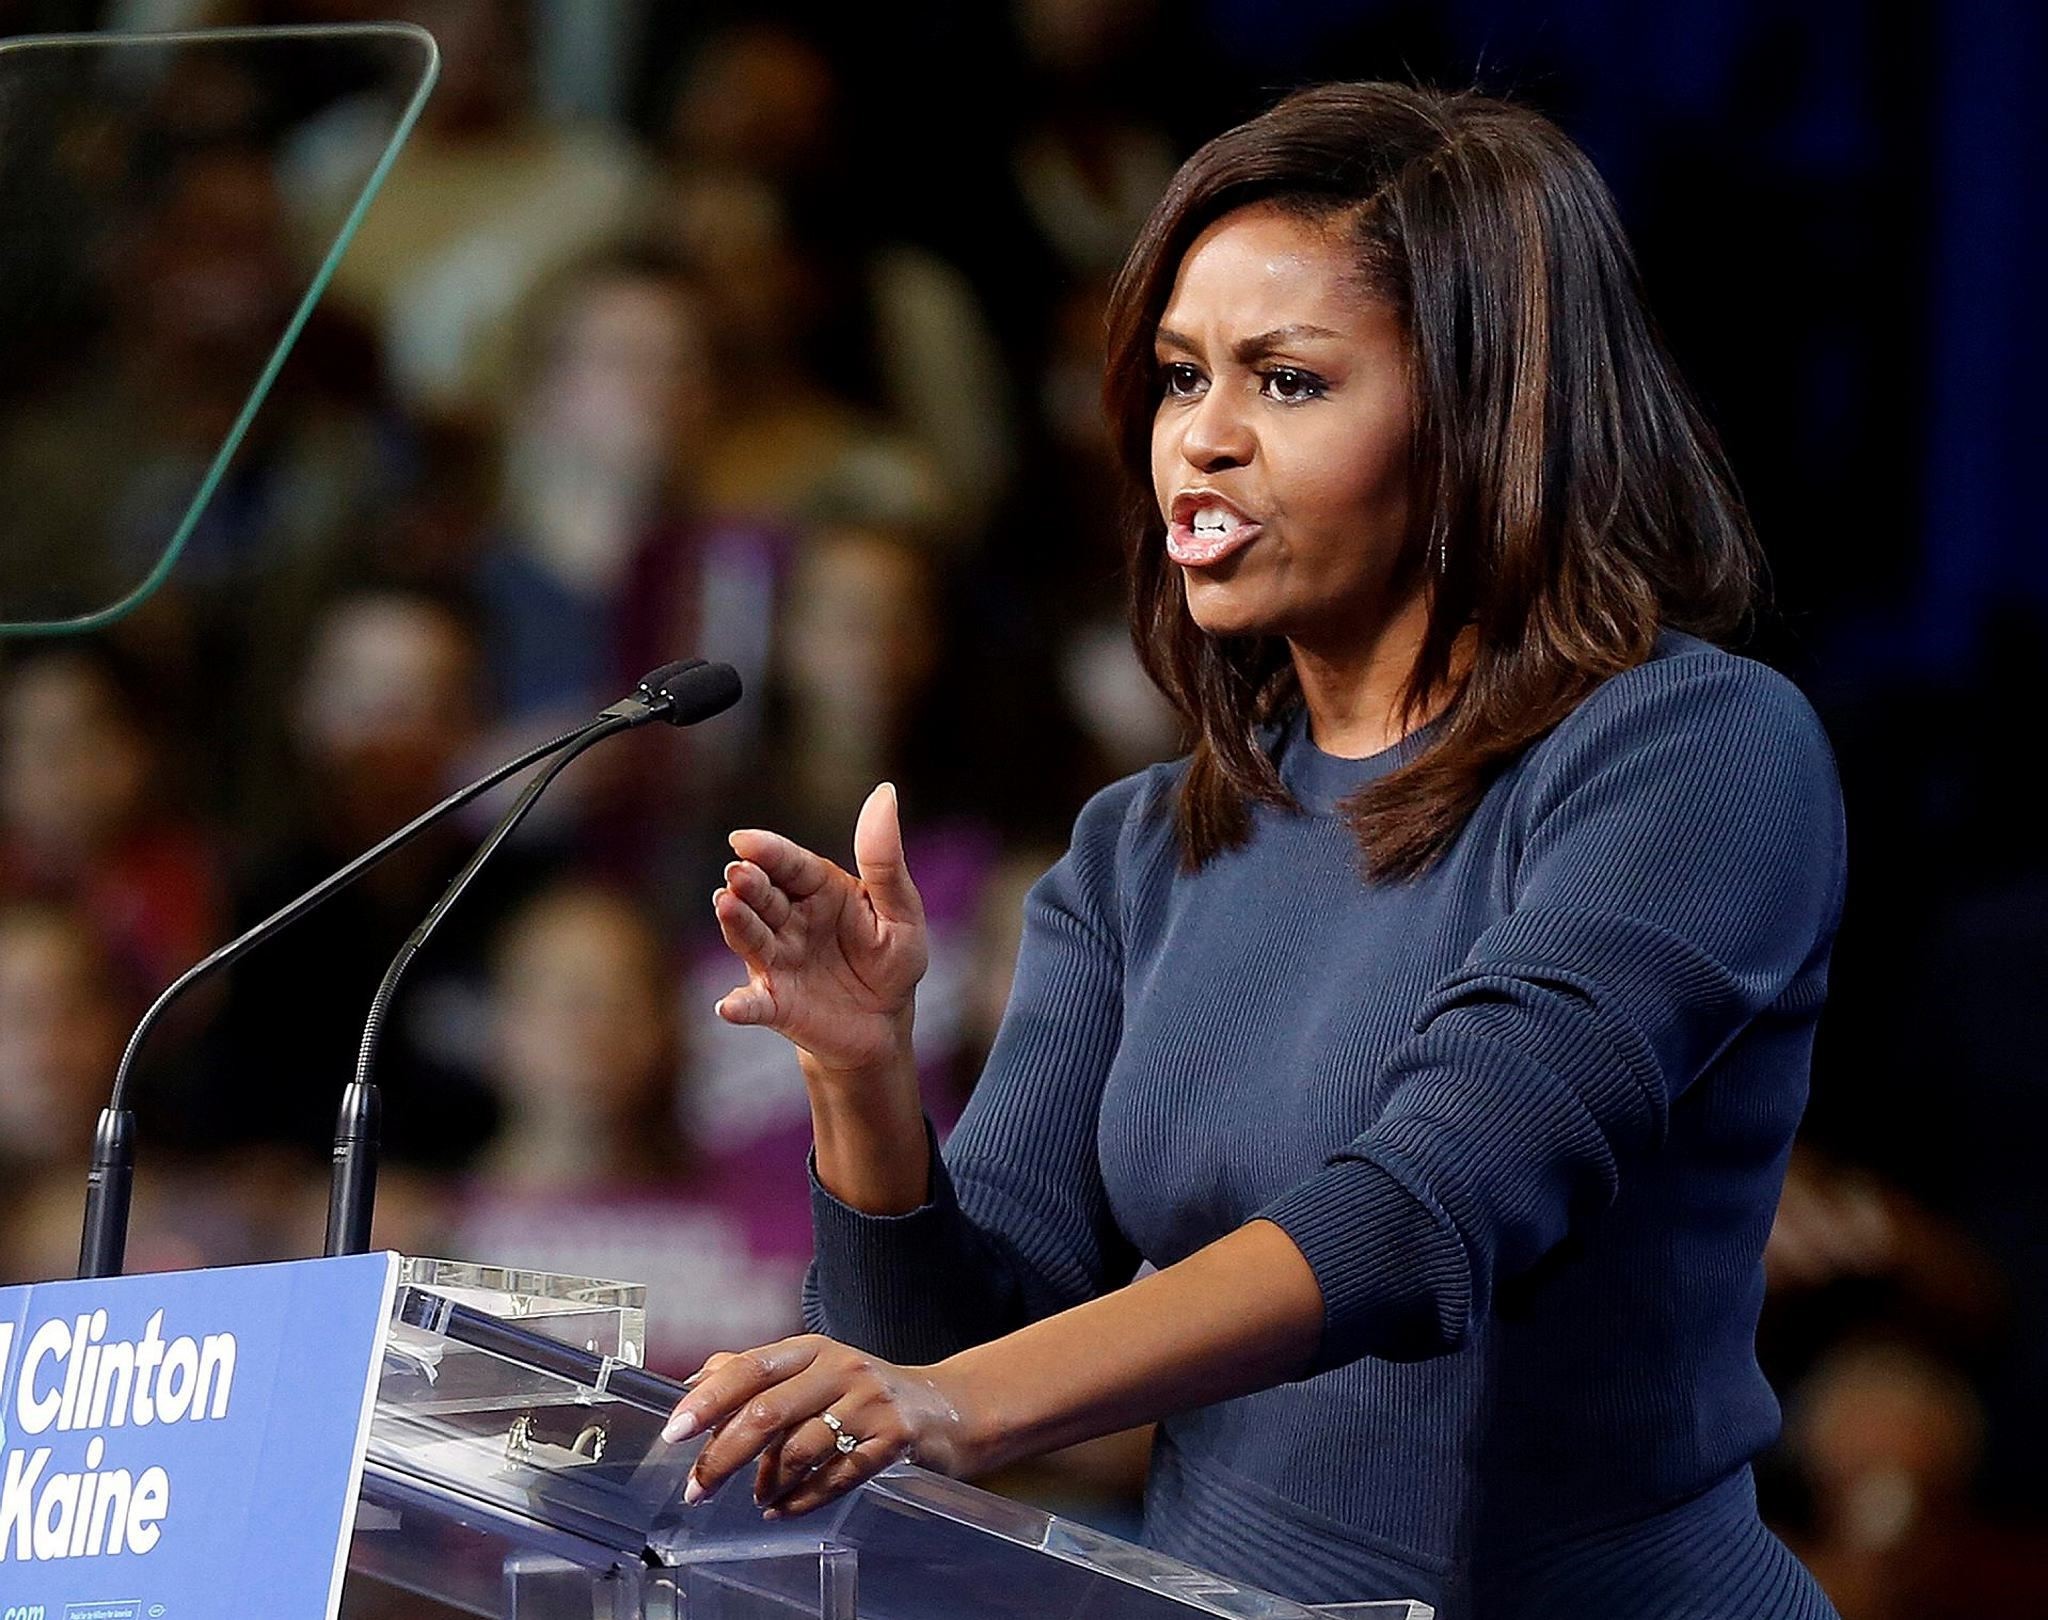 First lady Michelle Obama speaks during a campaign rally for Democratic presidential candidate Hillary Clinton Thursday, Oct. 13, 2016, in Manchester, N.H. (AP Photo)